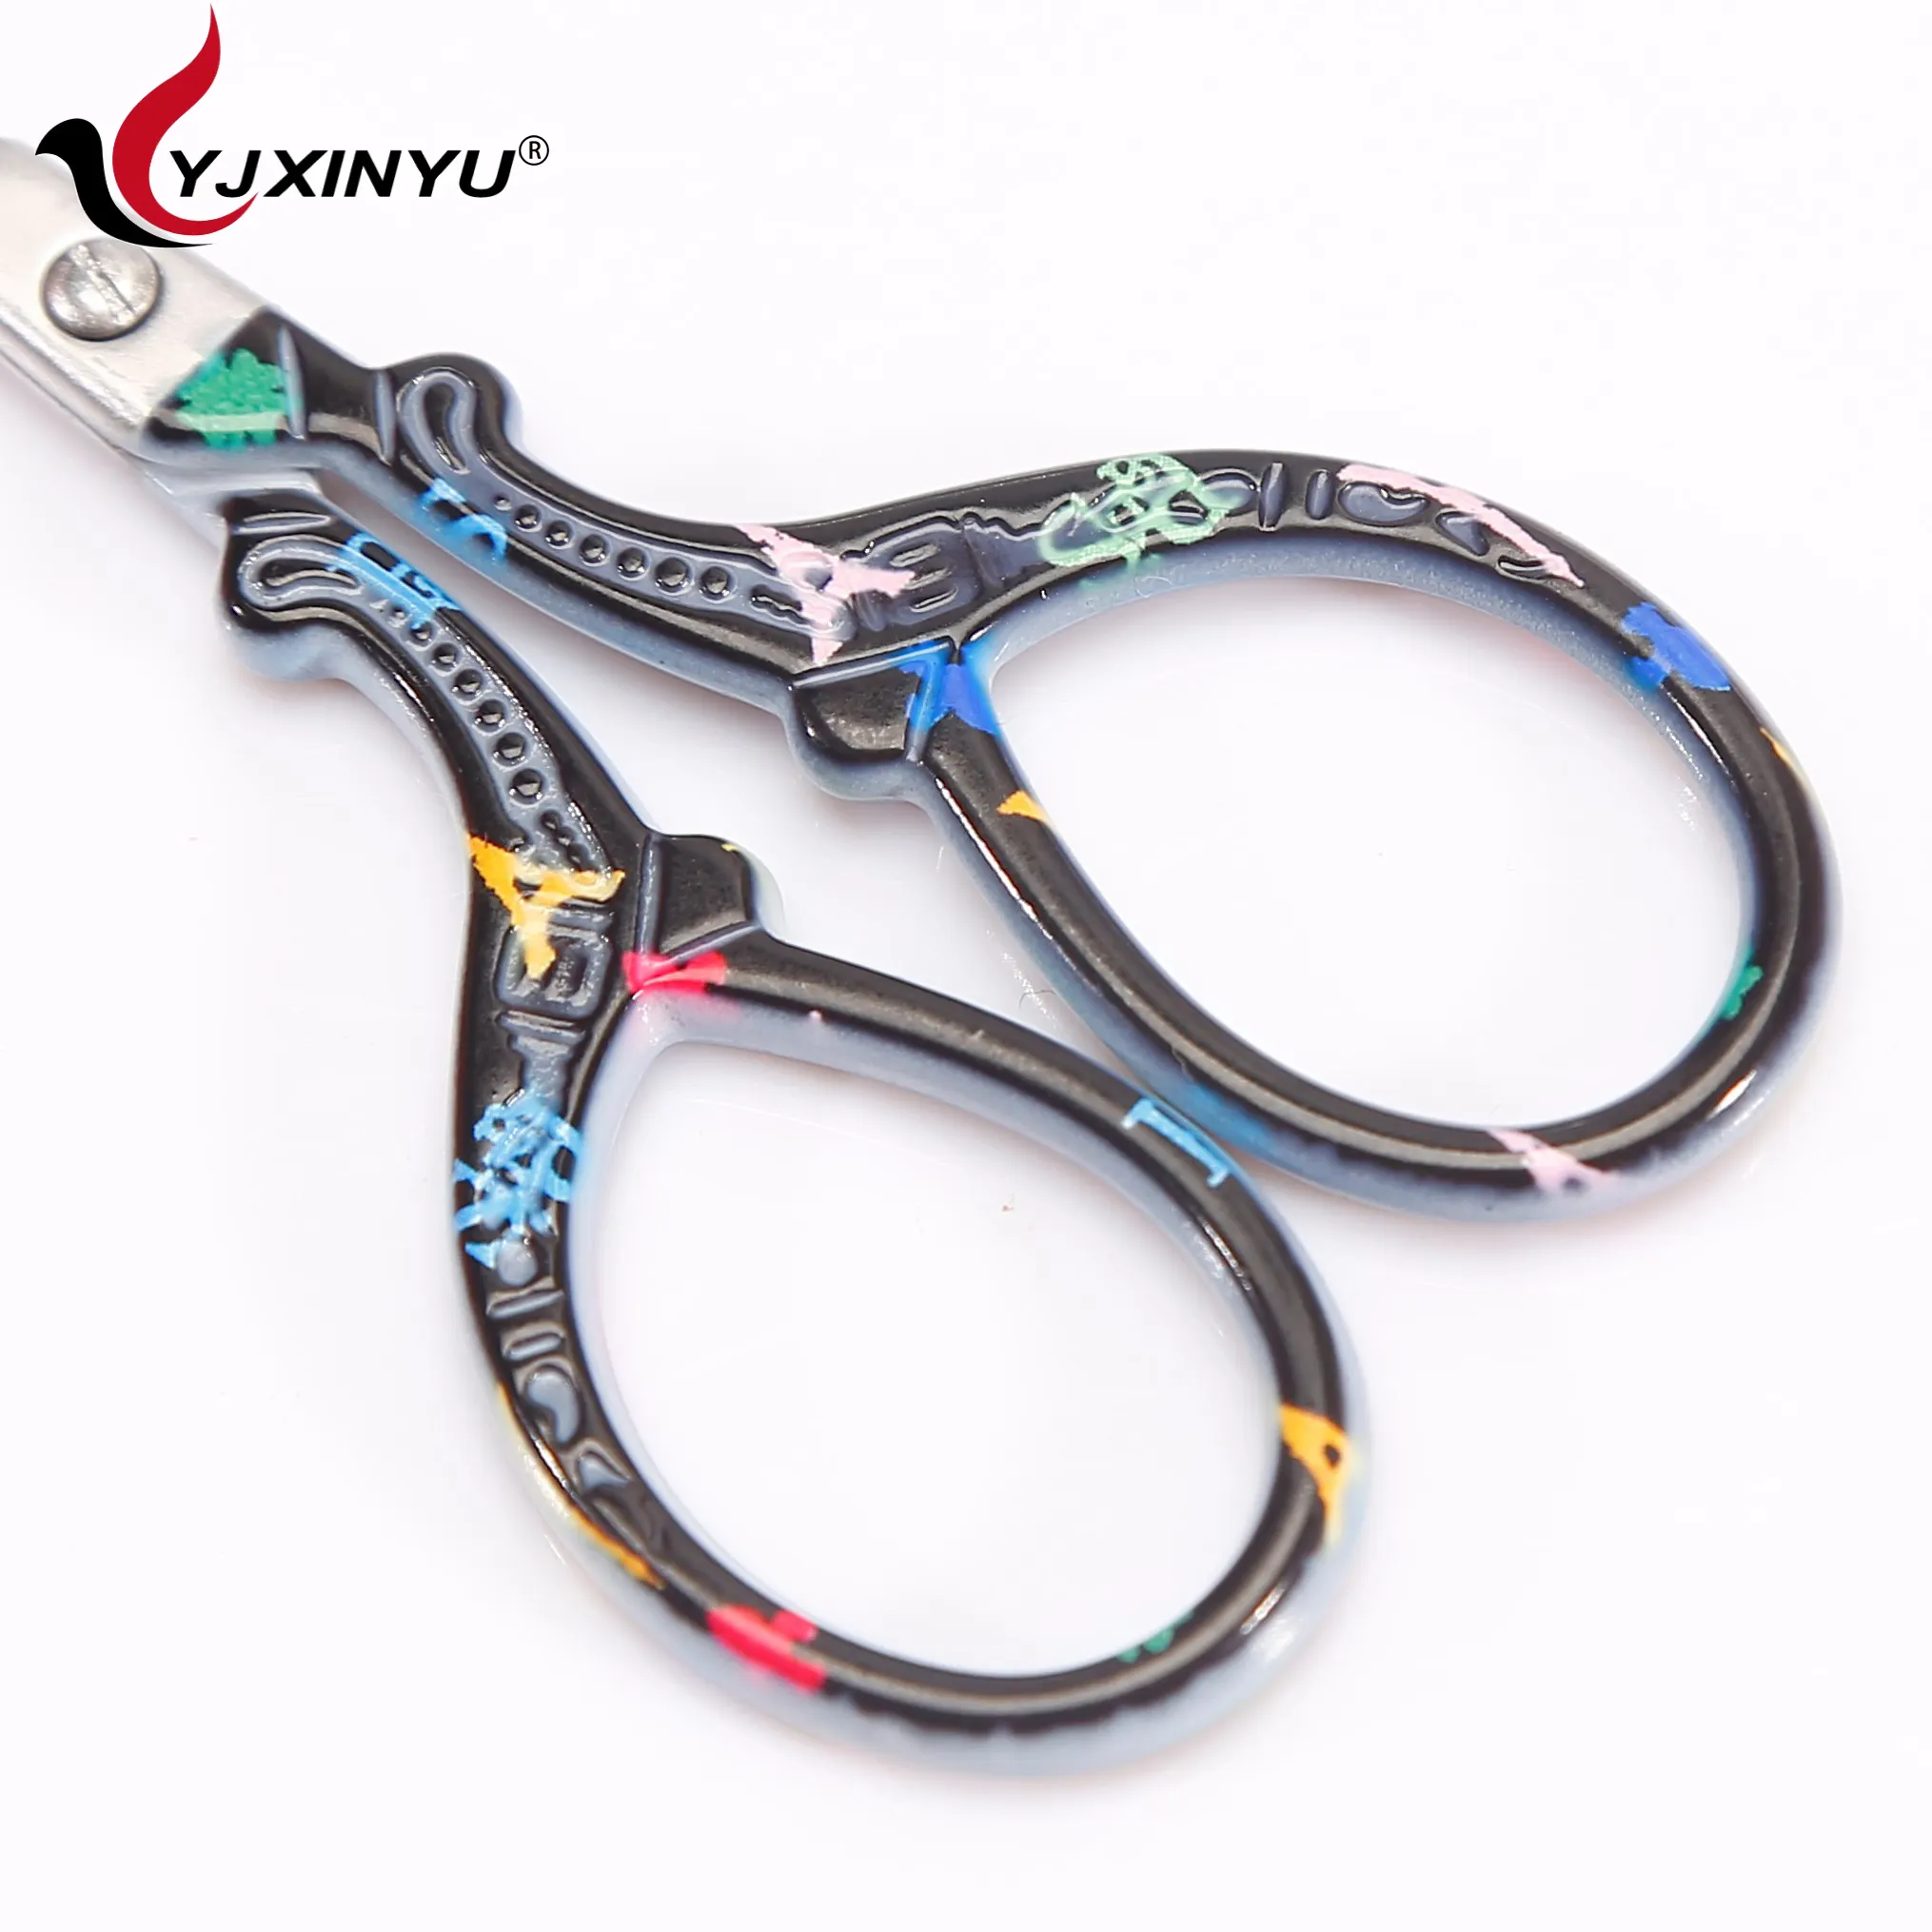 3.5 Inch Vintage Embroidery Scissors Stainless Steel Sewing Craft Scissors For Embroidery Sewing Craft